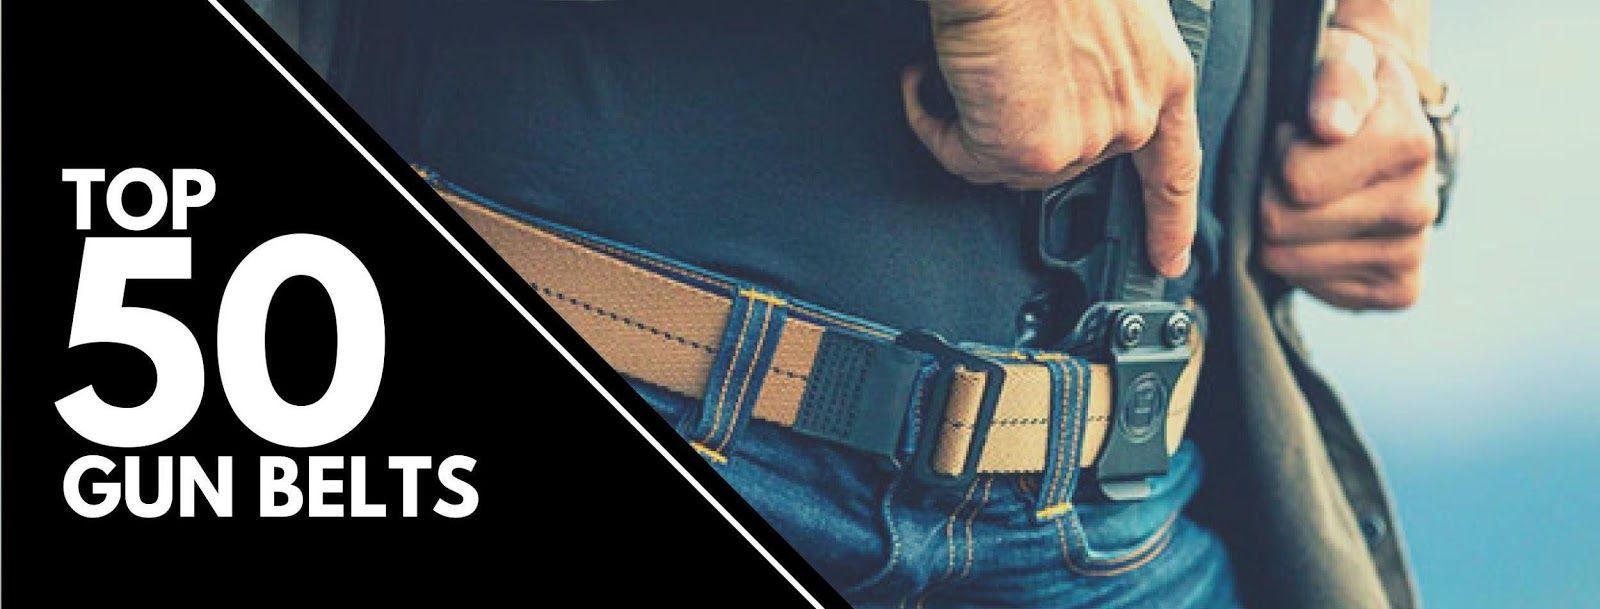 Top 50 Gun Belts On The Planet - MASK Tactical